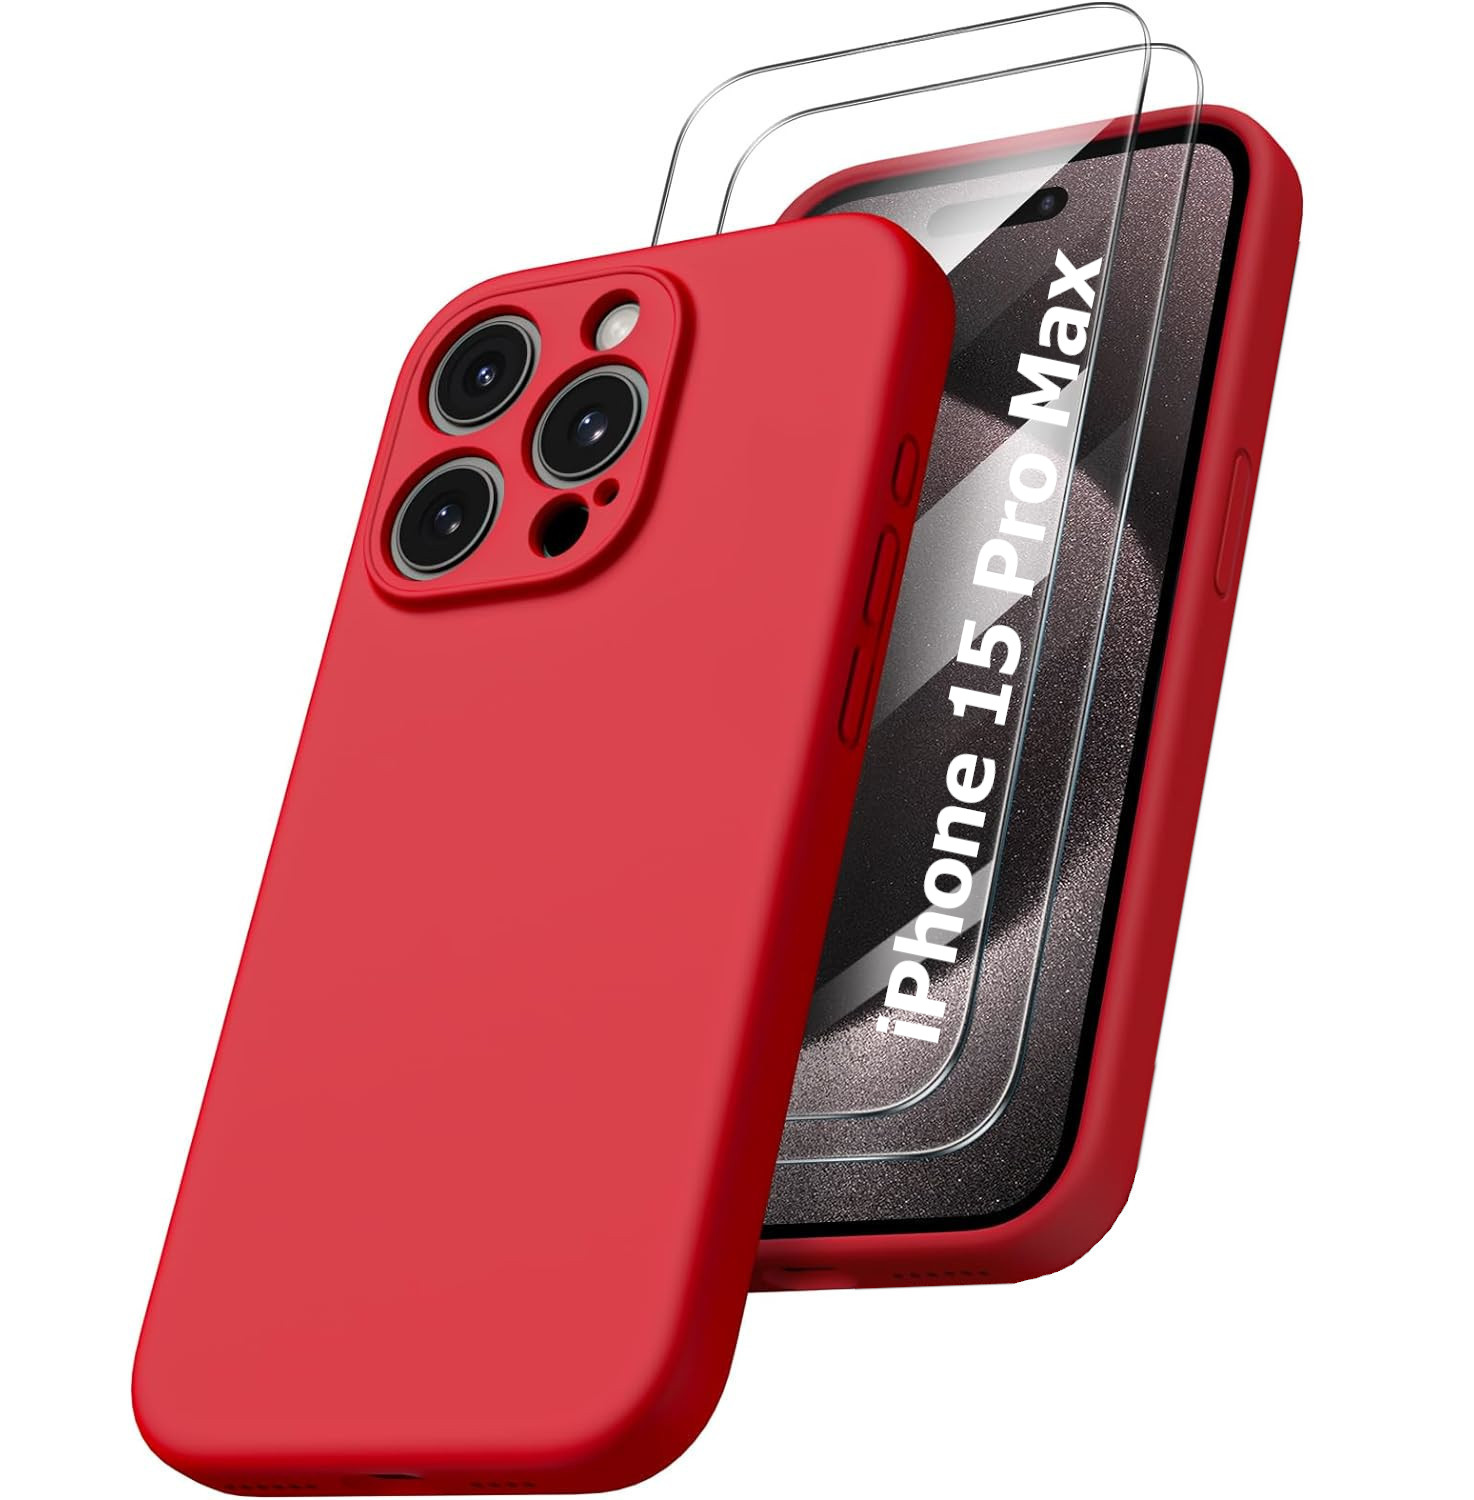 coque-red-glass-x2-iphone-15-pro-max